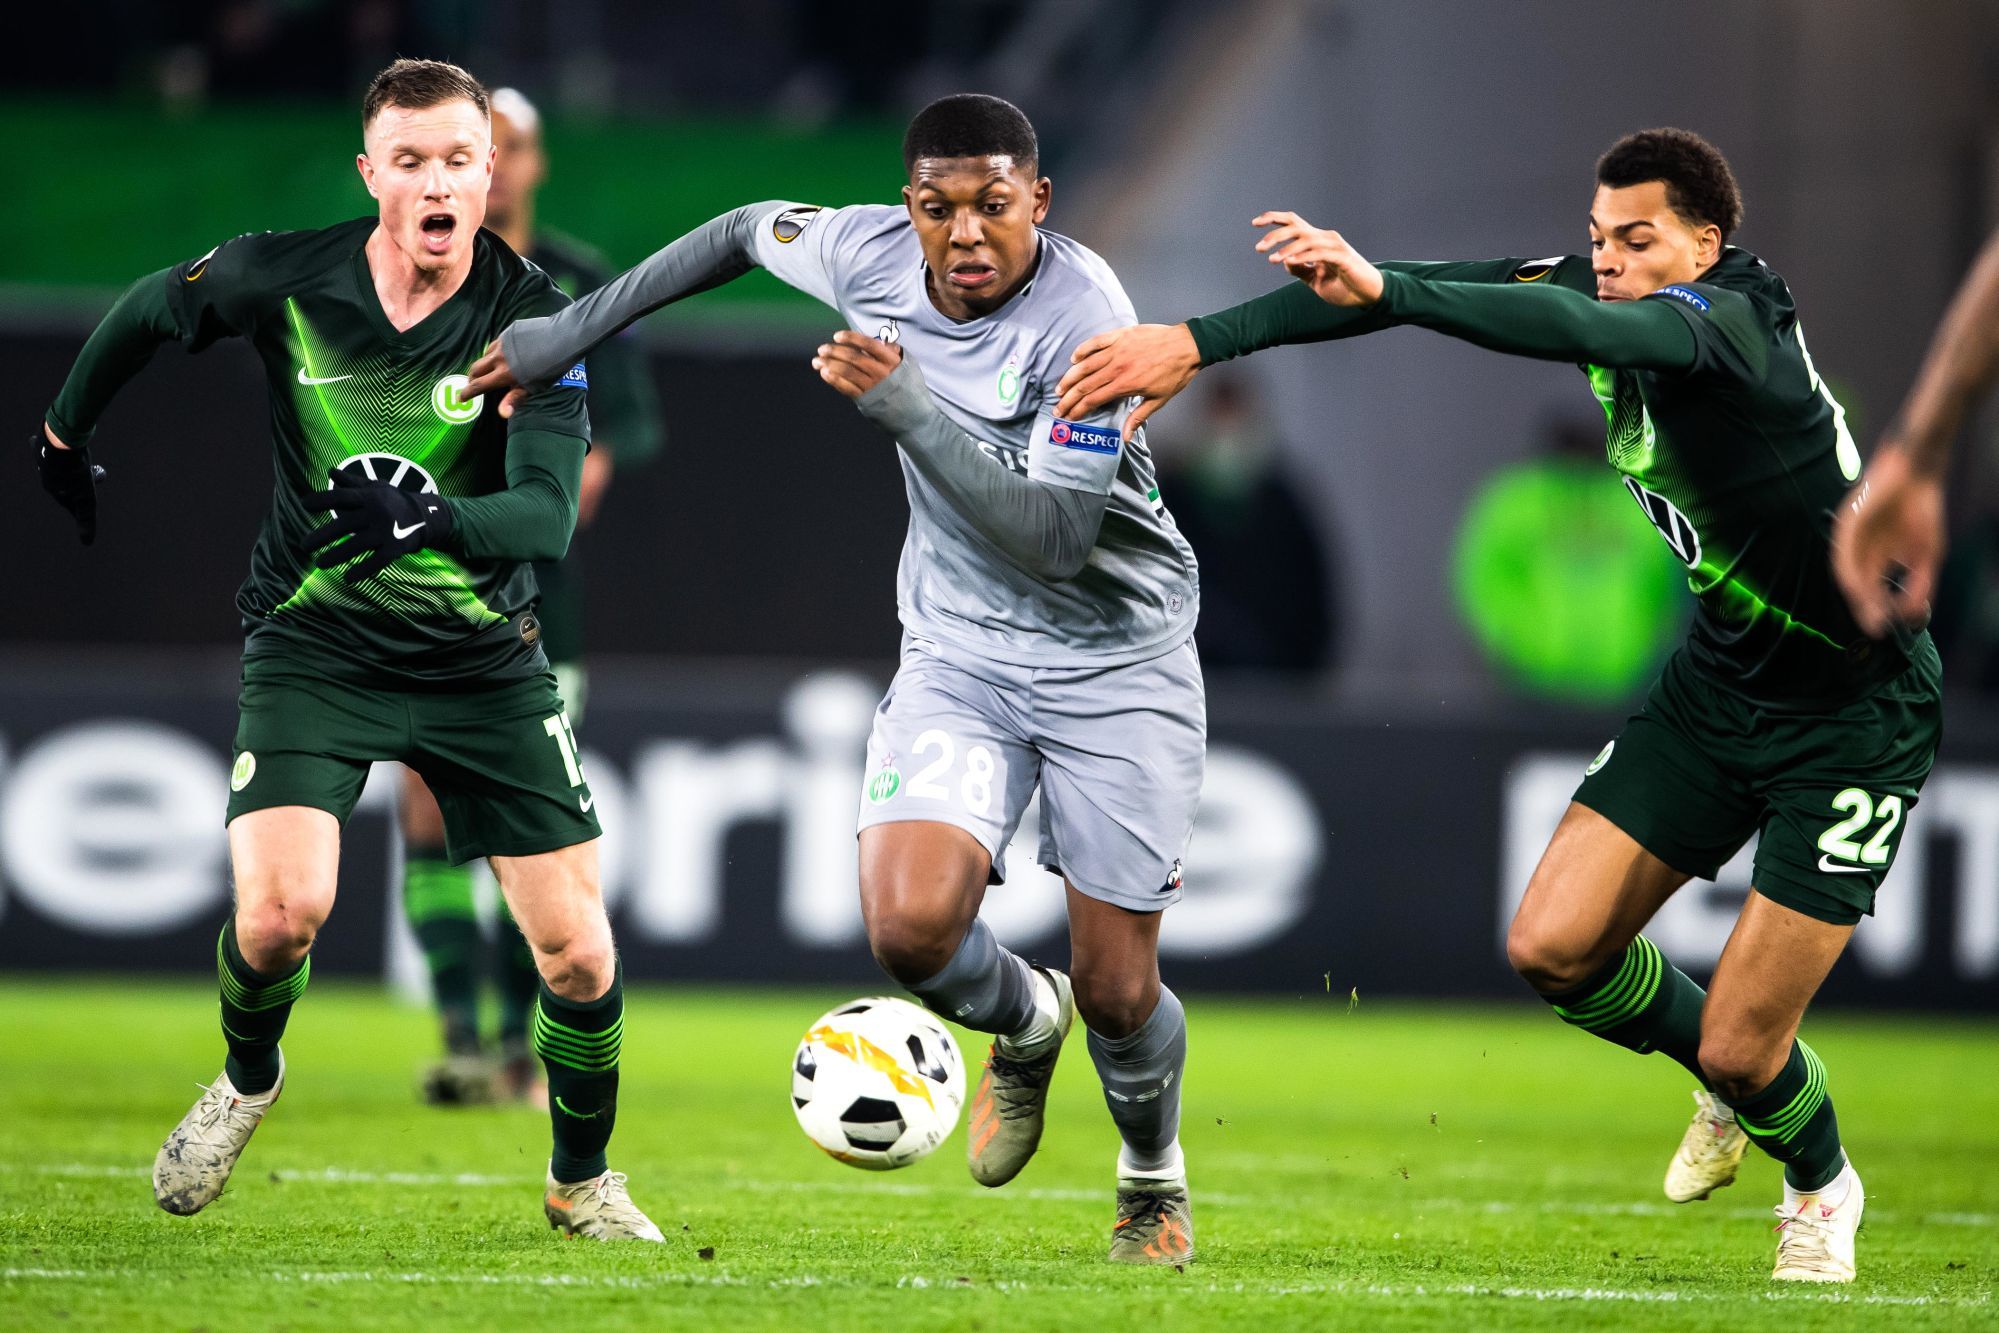 12 December 2019, Lower Saxony, Wolfsburg: Soccer: Europa League, VfL Wolfsburg - AS St. Etienne, Group stage, Group I, 6th matchday in the Volkswagen Arena. Zaydou Youssouf (M) of St. Etienne plays against the Wolfsburg Yannick Gerhardt (l) and Lukas Nmecha. Photo: Swen Pfˆrtner/dpa 
Photo by Icon Sport - Volkswagen Arena - Wolfsbourg (Allemagne)